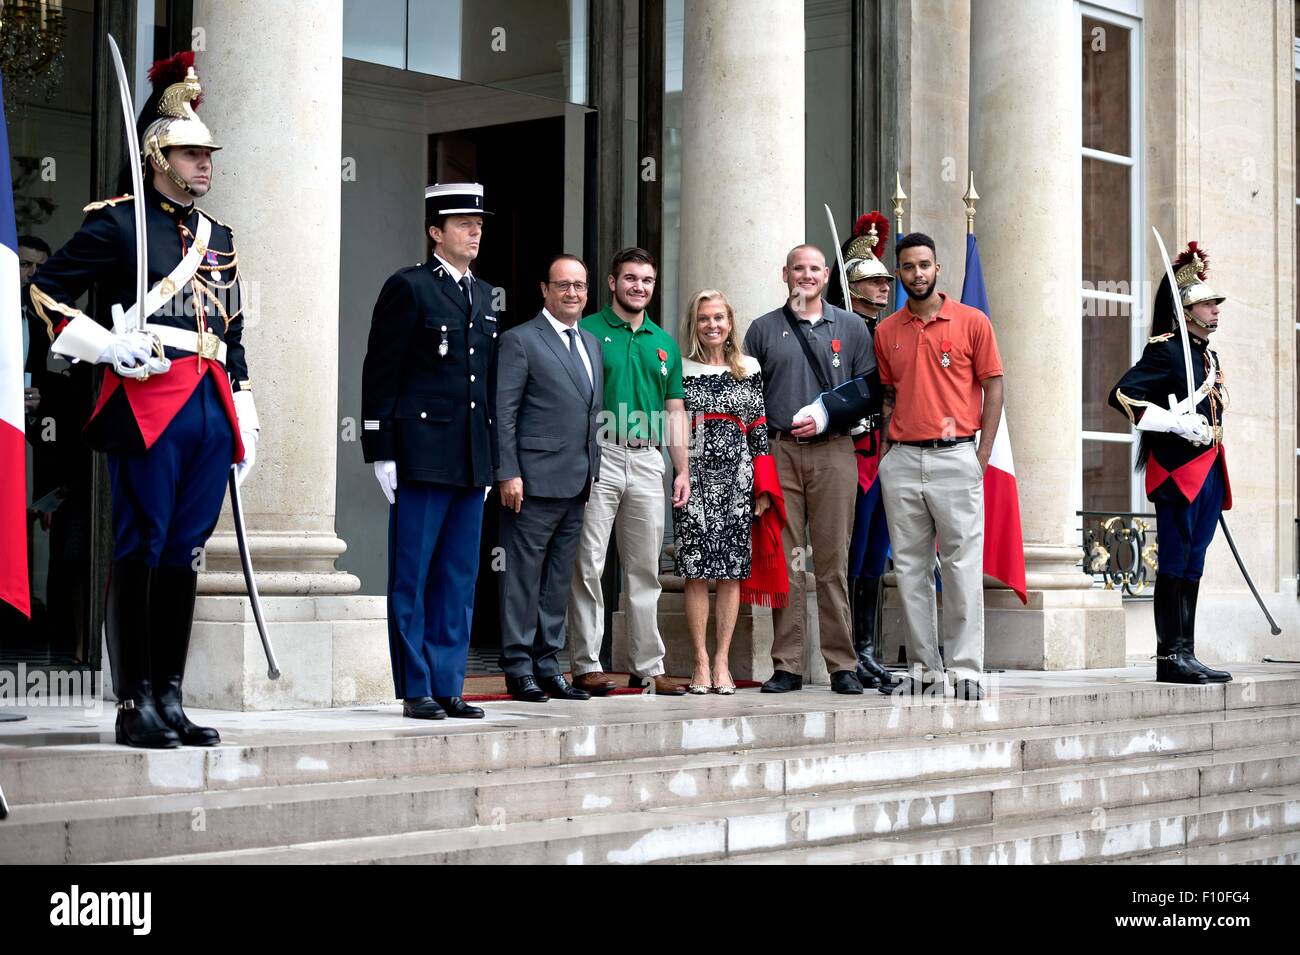 Paris, France. 24th Aug, 2015. (From 3-L to 7-L) French President Francois Hollande poses a photo with Alek Skarlatos, U.S. Ambassador to France Jane D. Hartley, Spencer Stone and Anthony Sadler at the Elysee Palace in Paris, France, Aug. 24, 2015. French President Francois Hollande on Monday awarded France's highest honor, the Legion d'honneur, to three U.S. men and Briton Chris Norman who helped neutralize a shooter at Thalys high-speed train between Amsterdam and Paris last week. Credit:  Andy Louis/Xinhua/Alamy Live News Stock Photo